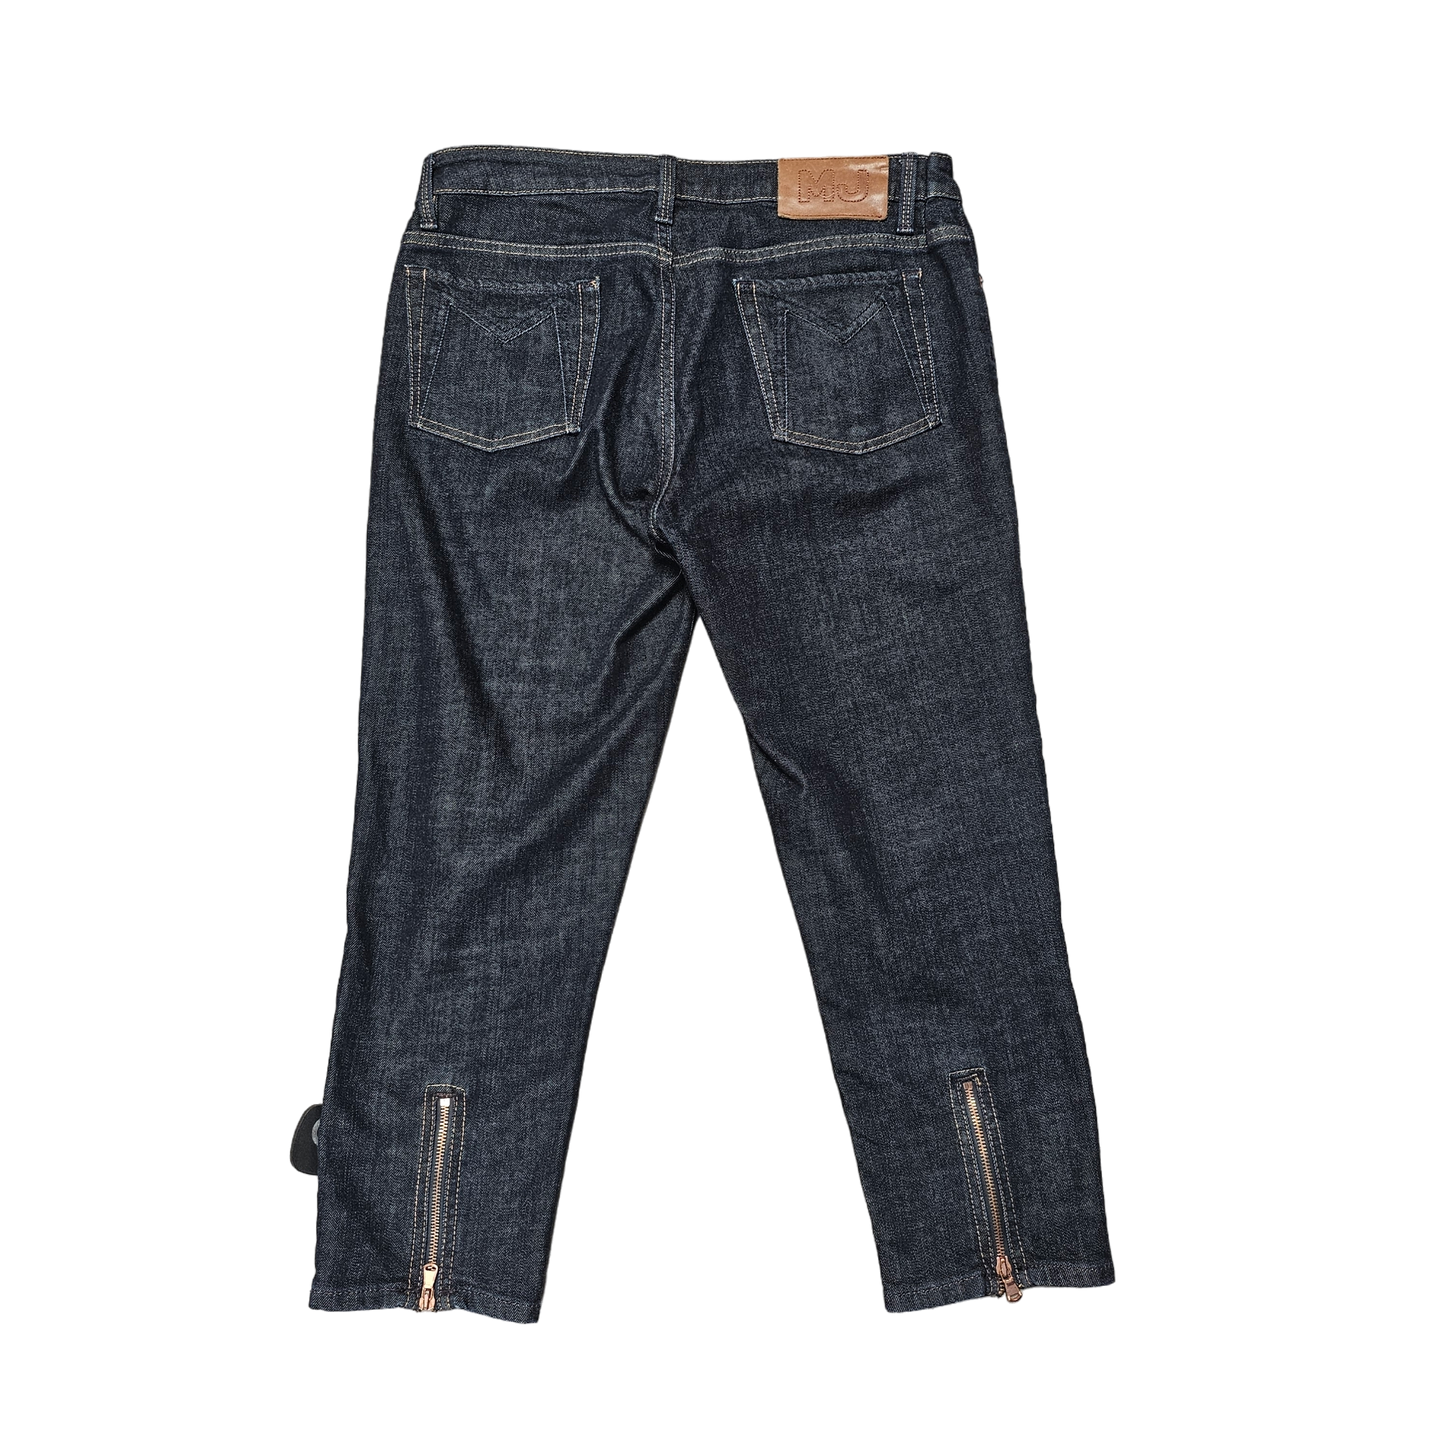 Jeans Relaxed/boyfriend By Marc By Marc Jacobs  Size: 8/31